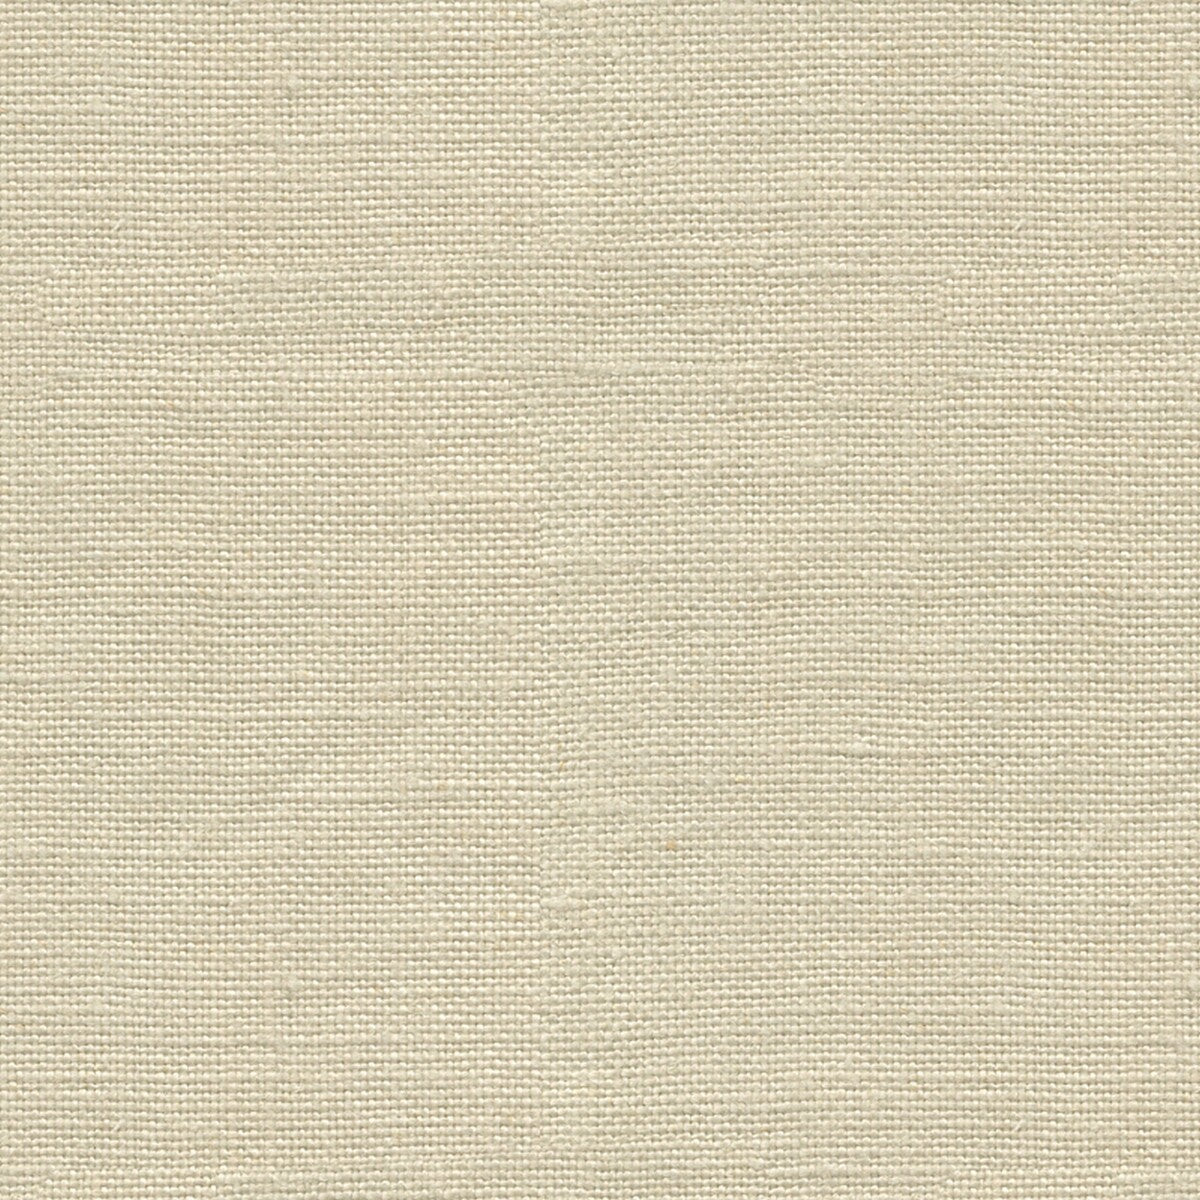 Newport fabric in parchment color - pattern ED85116.225.0 - by Threads in the Variation collection